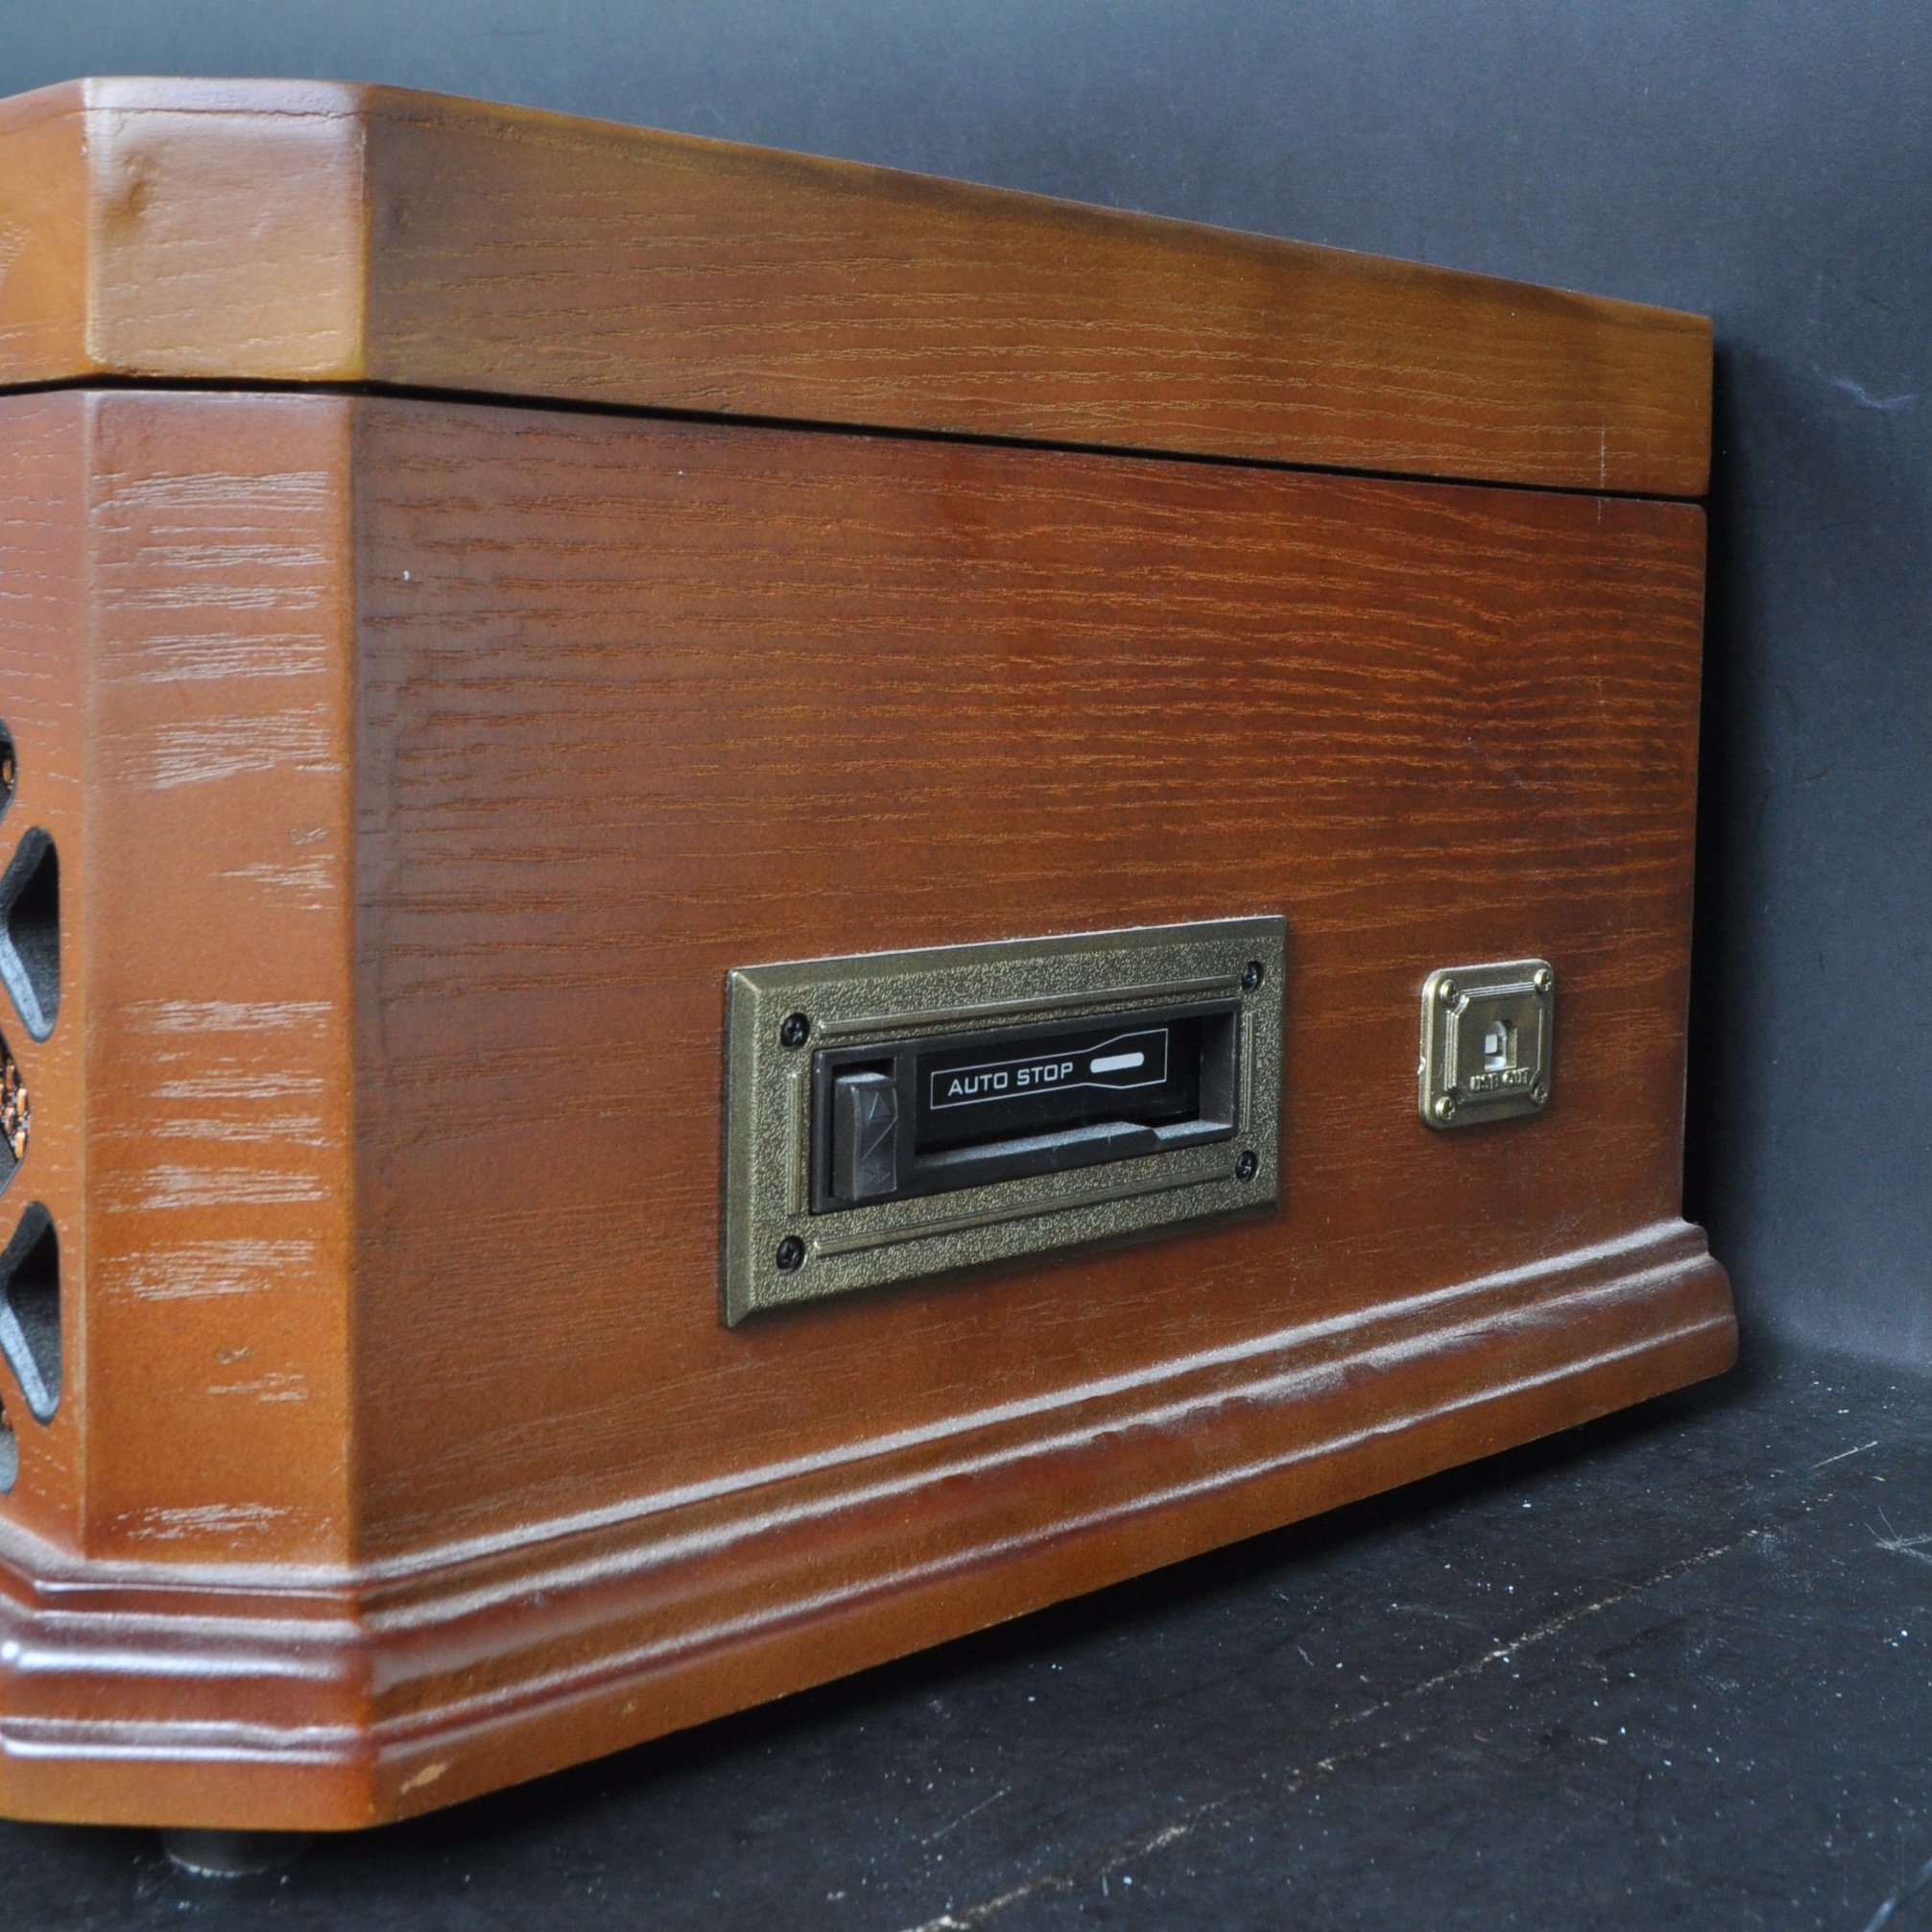 A contemporary vintage revival wooden cased hi-fi stereo system having decorative facia dials with - Image 3 of 7